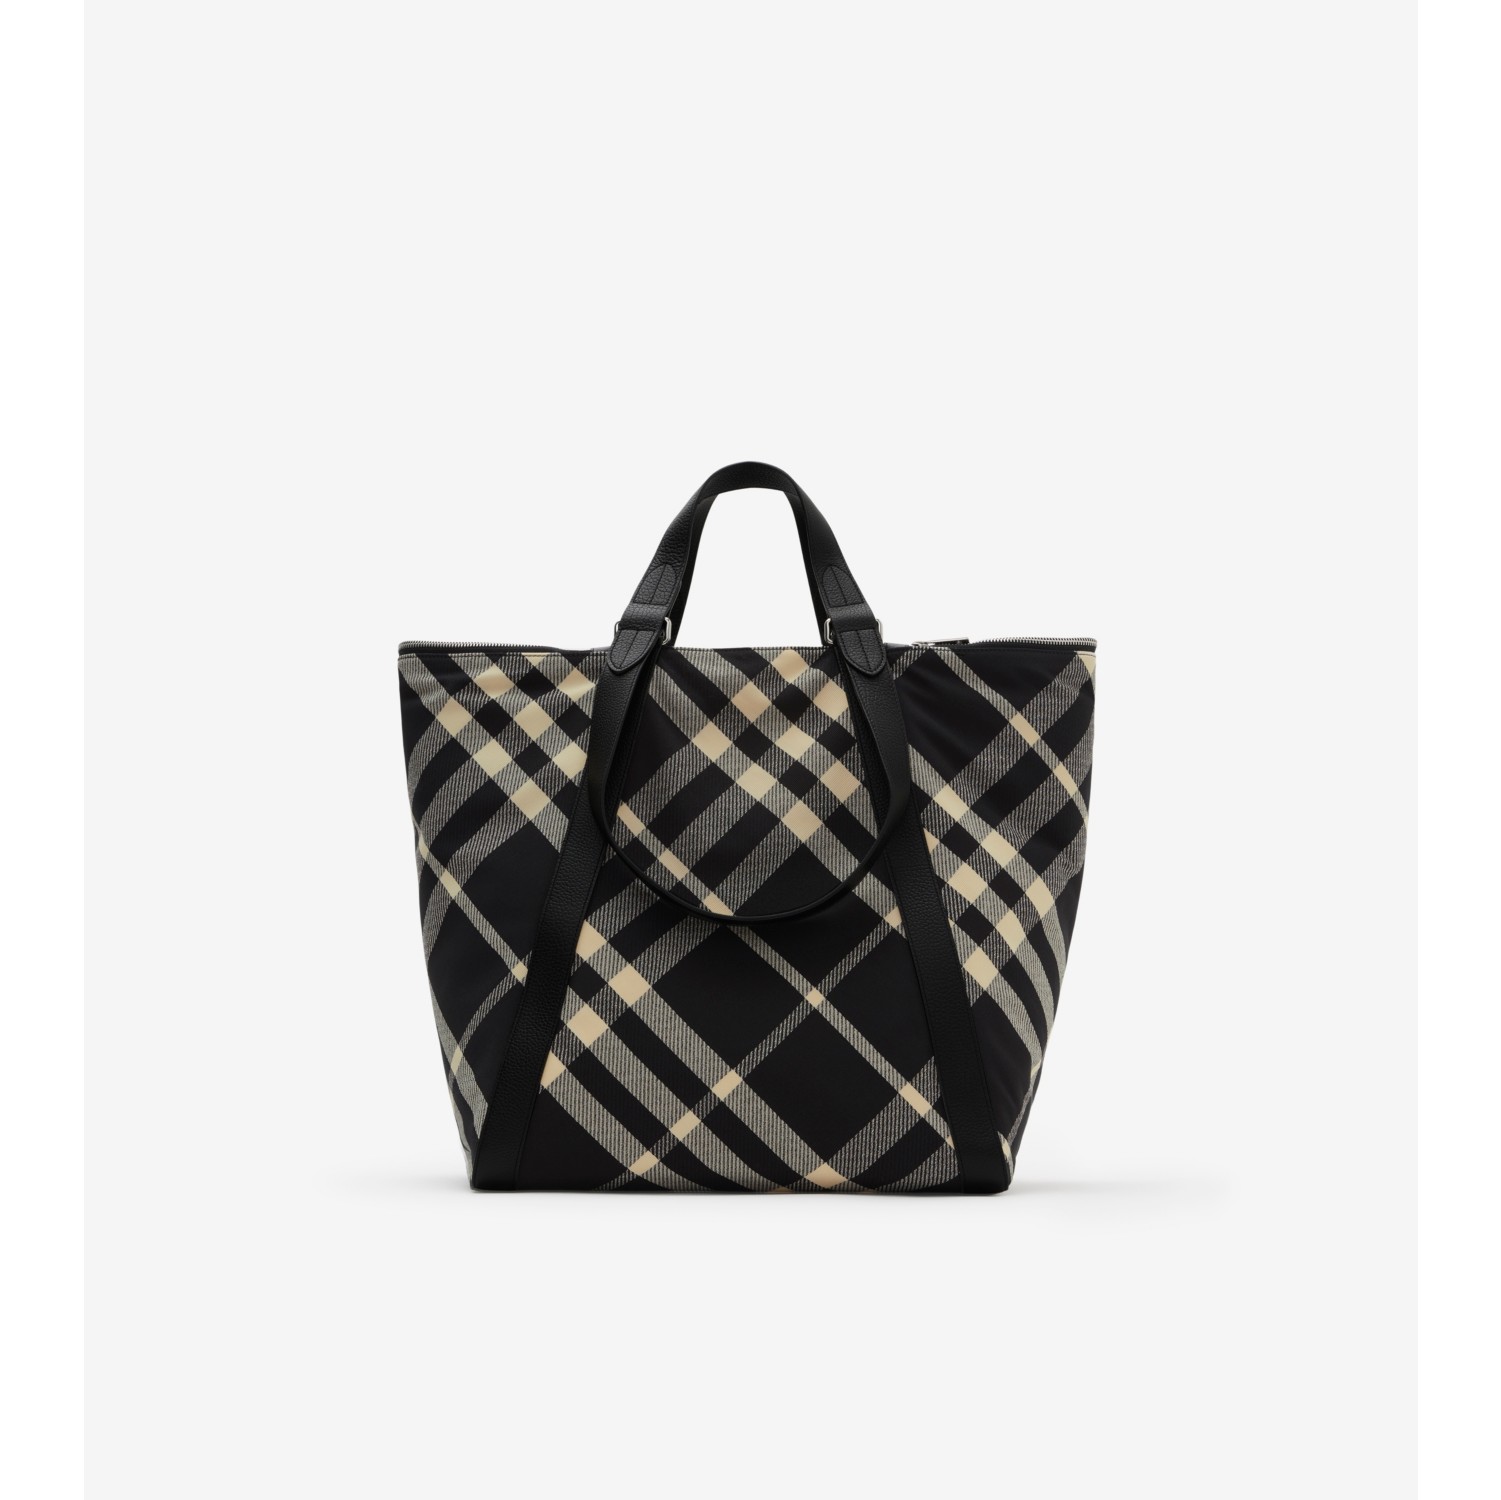 Medium Field Tote in Black/calico - Women | Burberry® Official